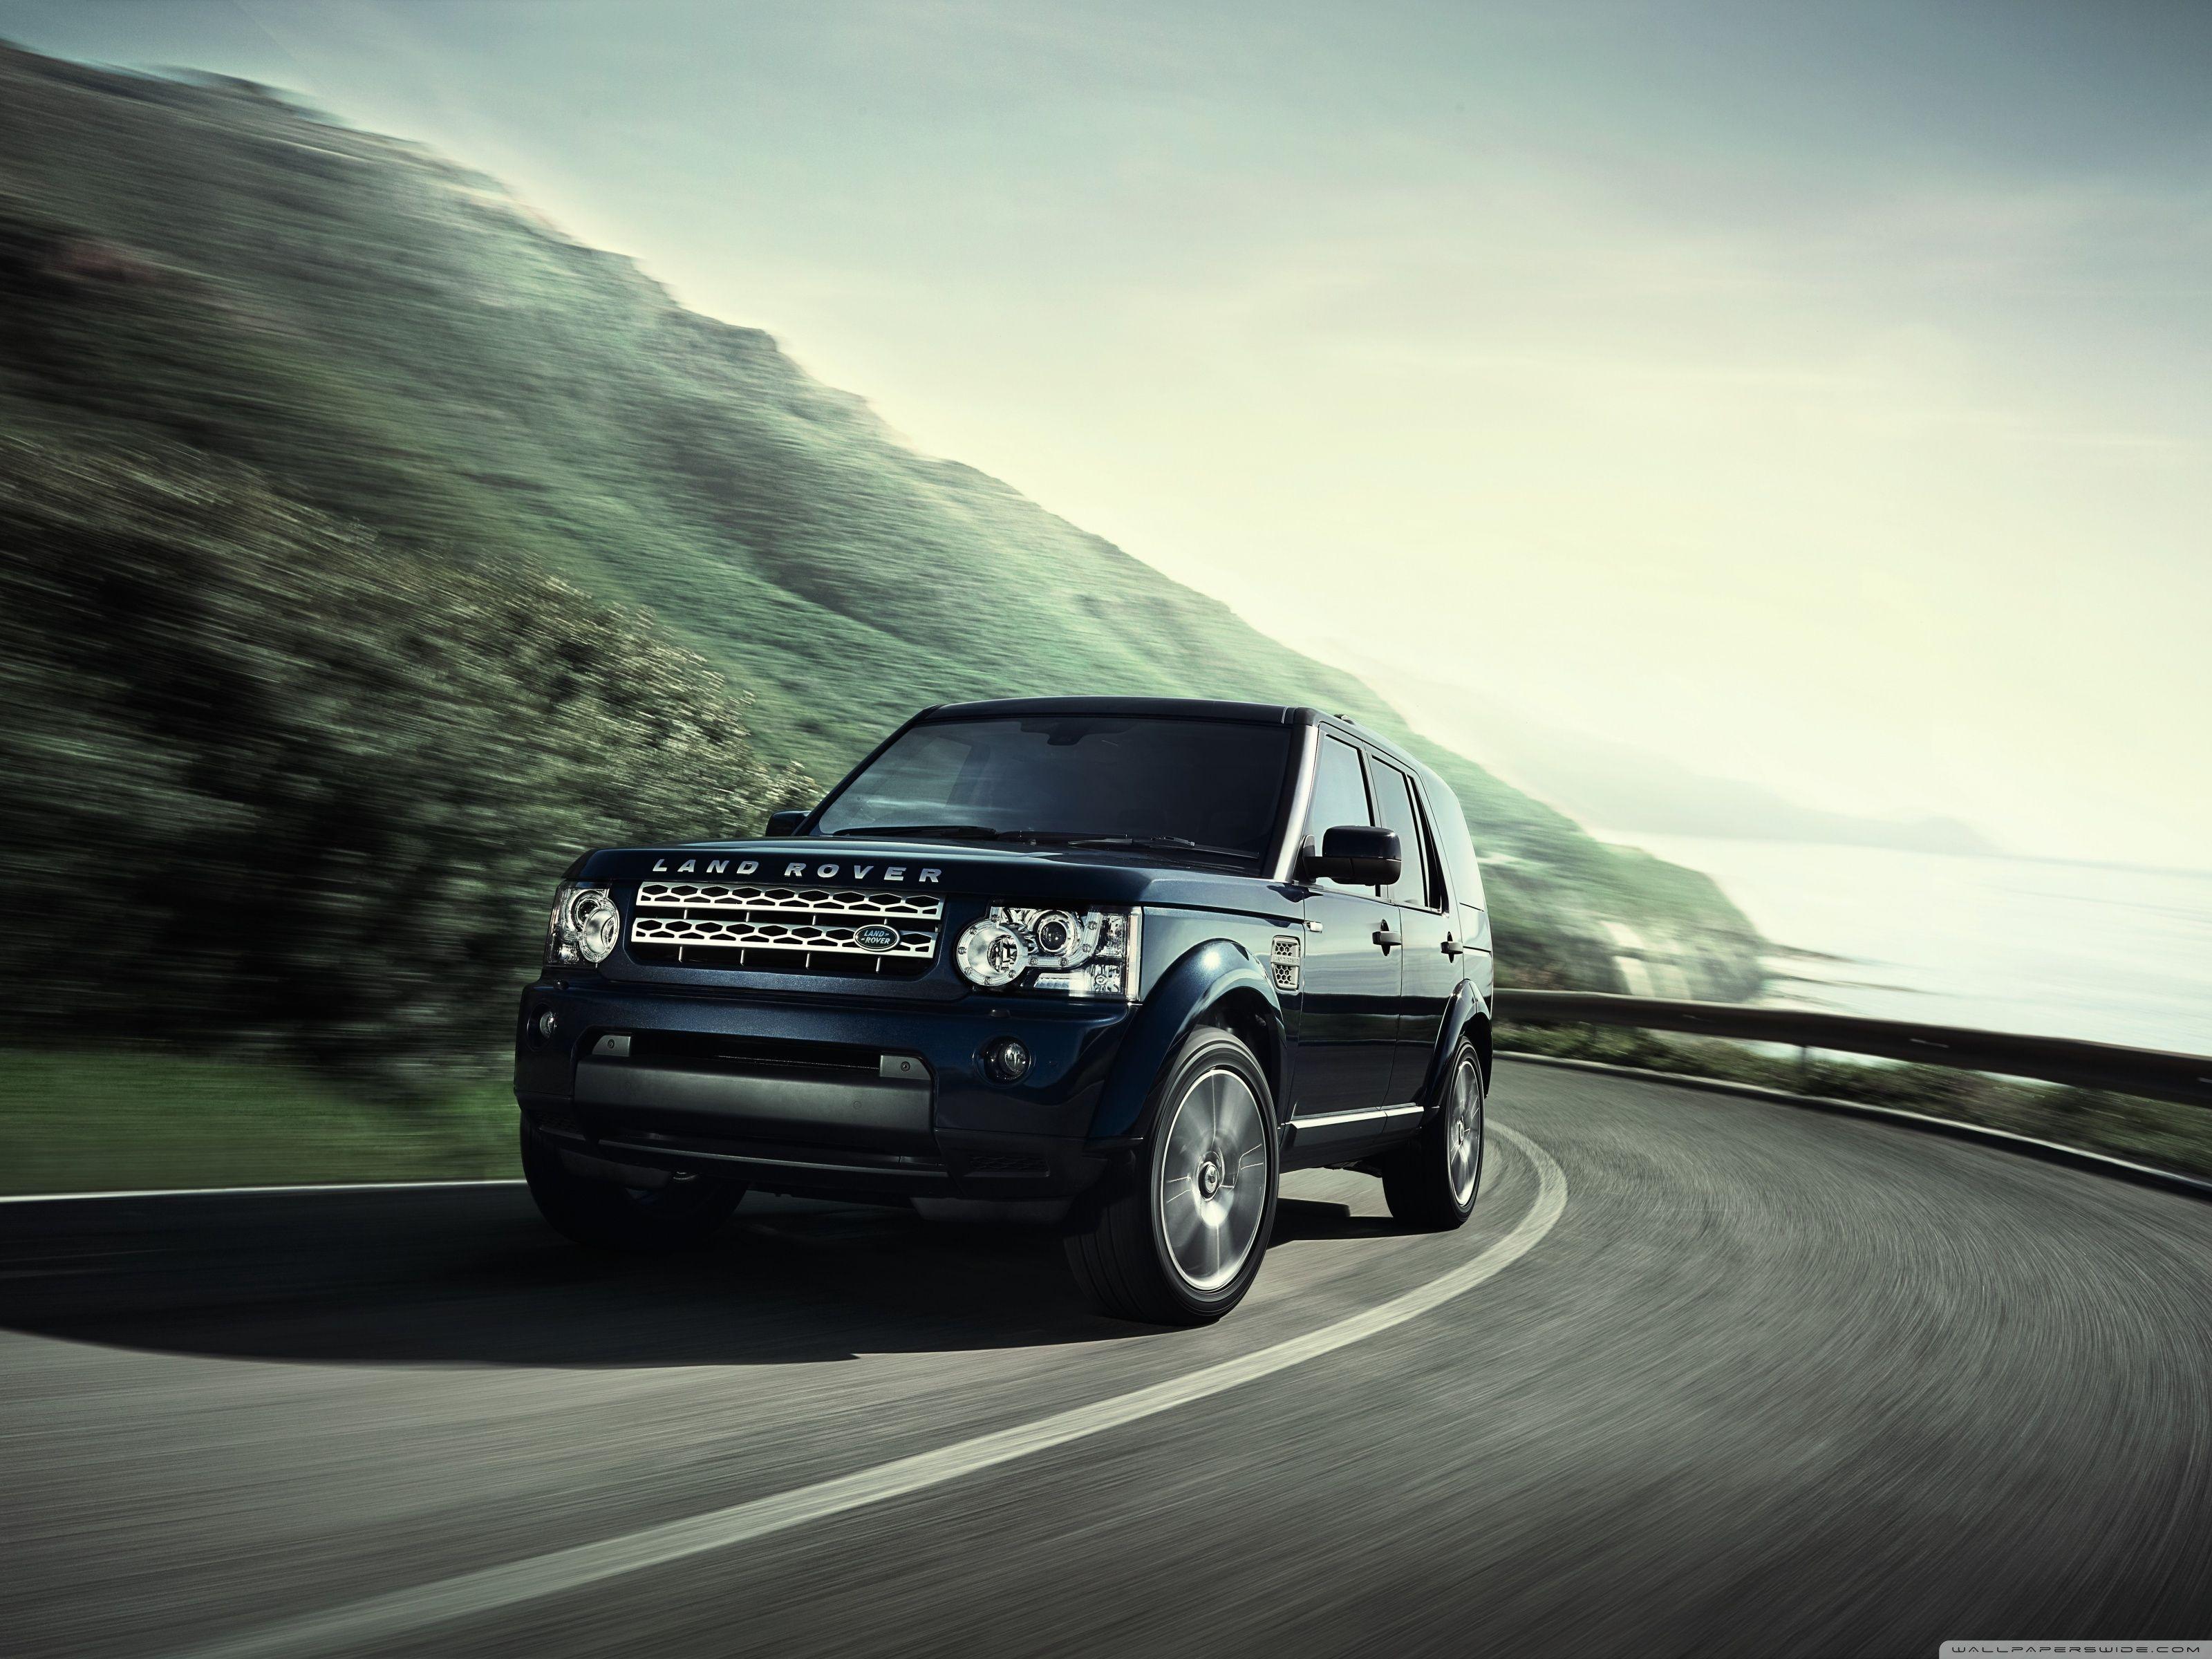 Land Rover Discovery ❤ 4K HD Desktop Wallpaper for • Dual Monitor